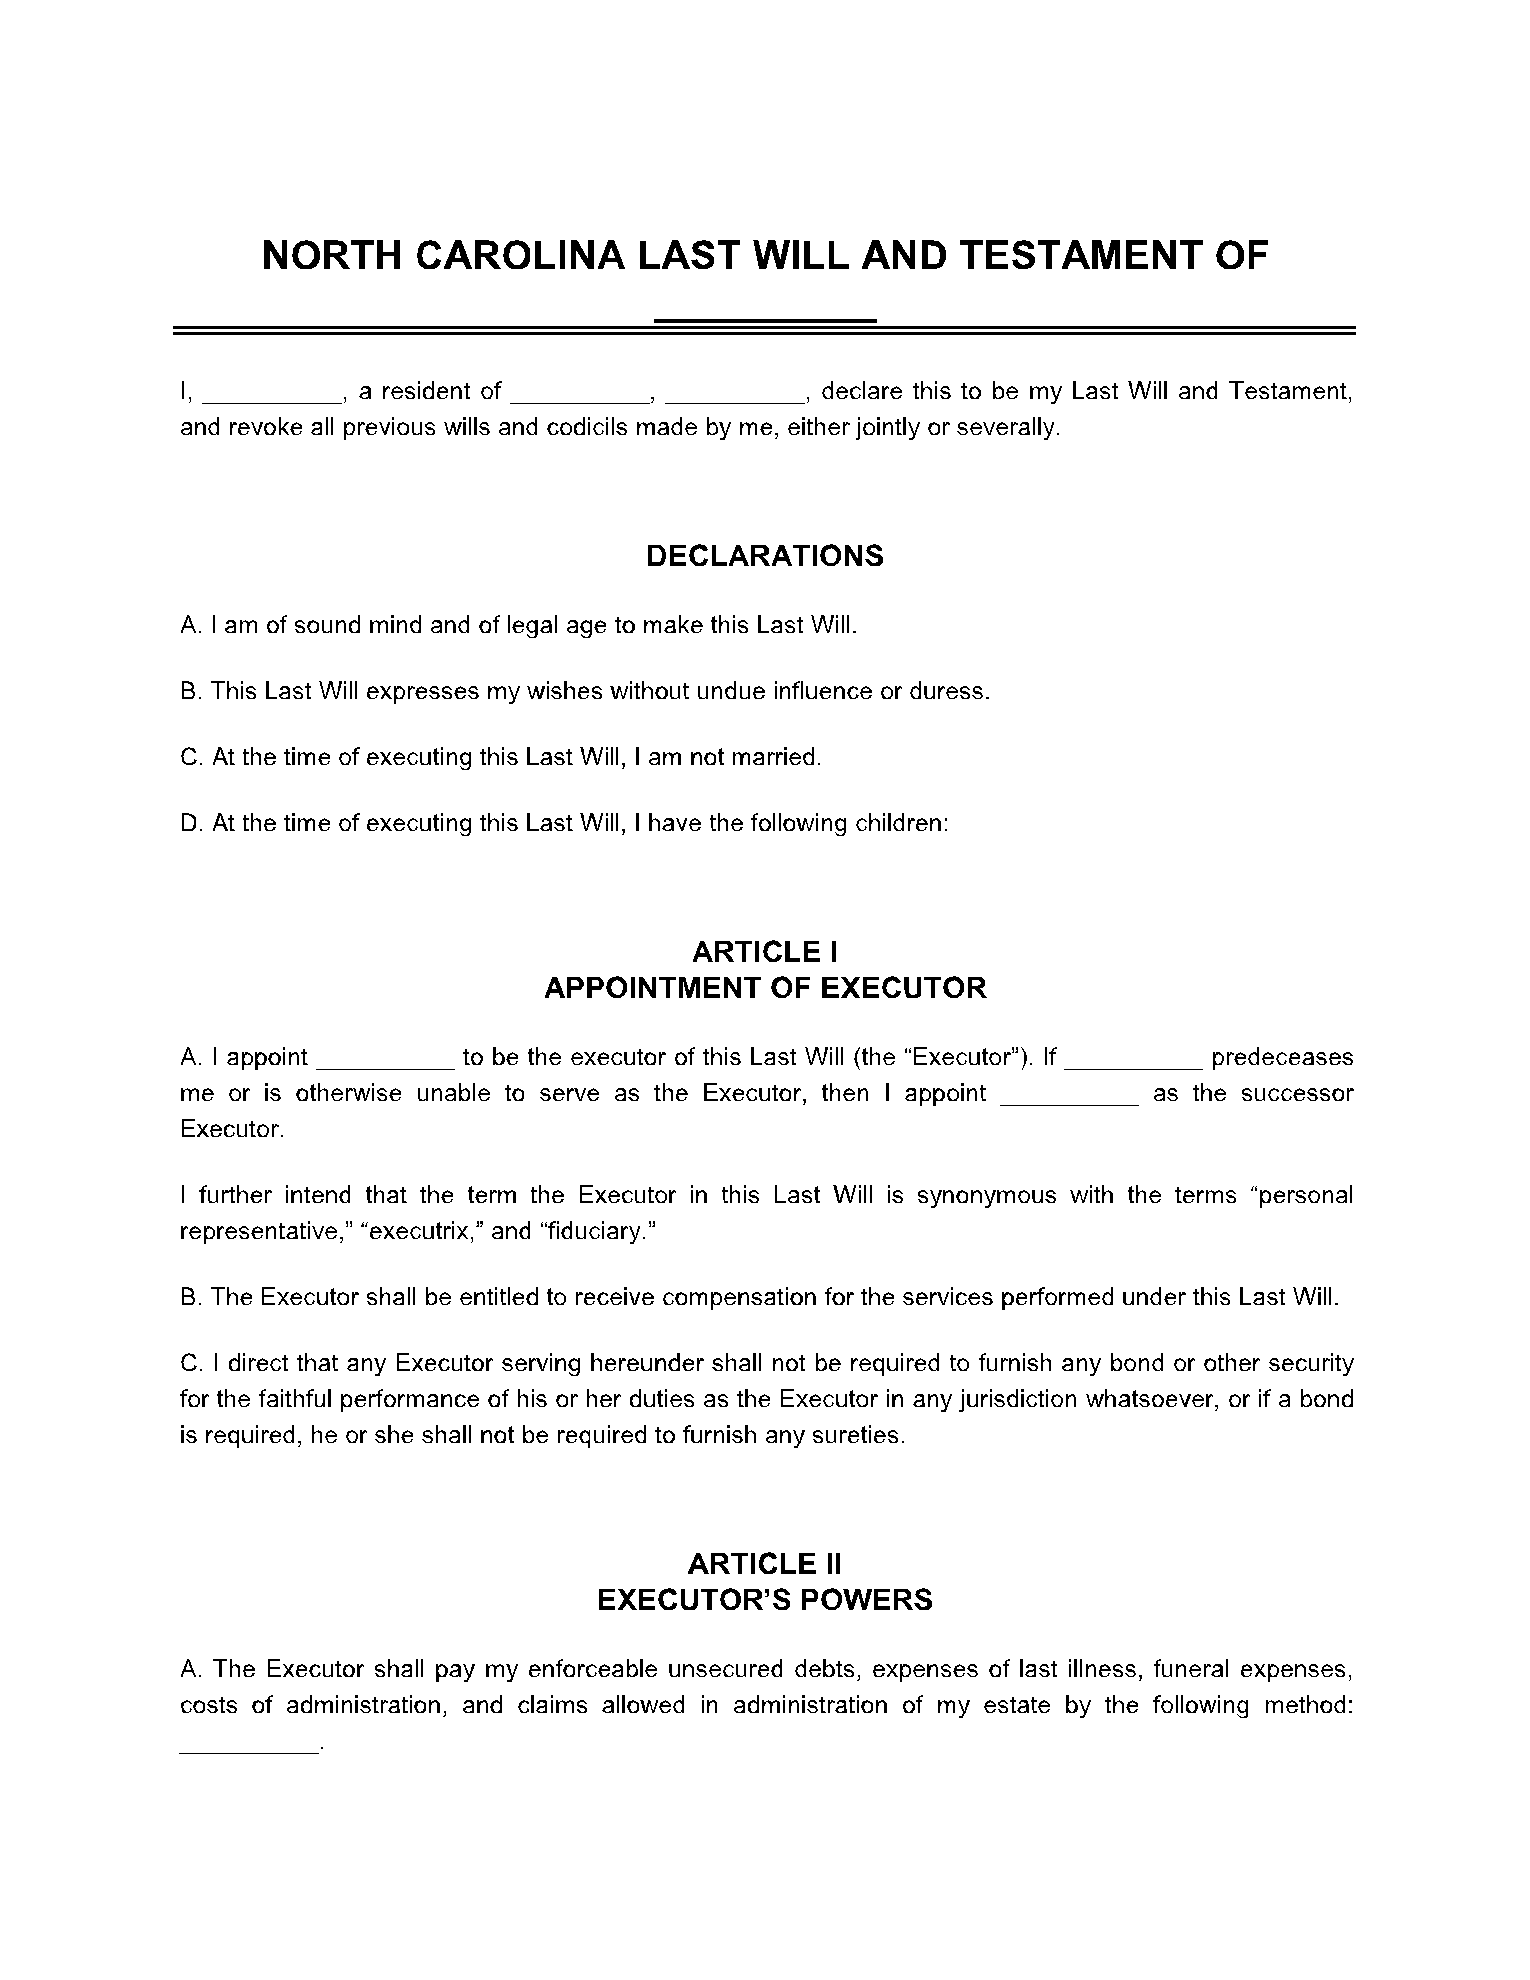 Last Will and Testament NC